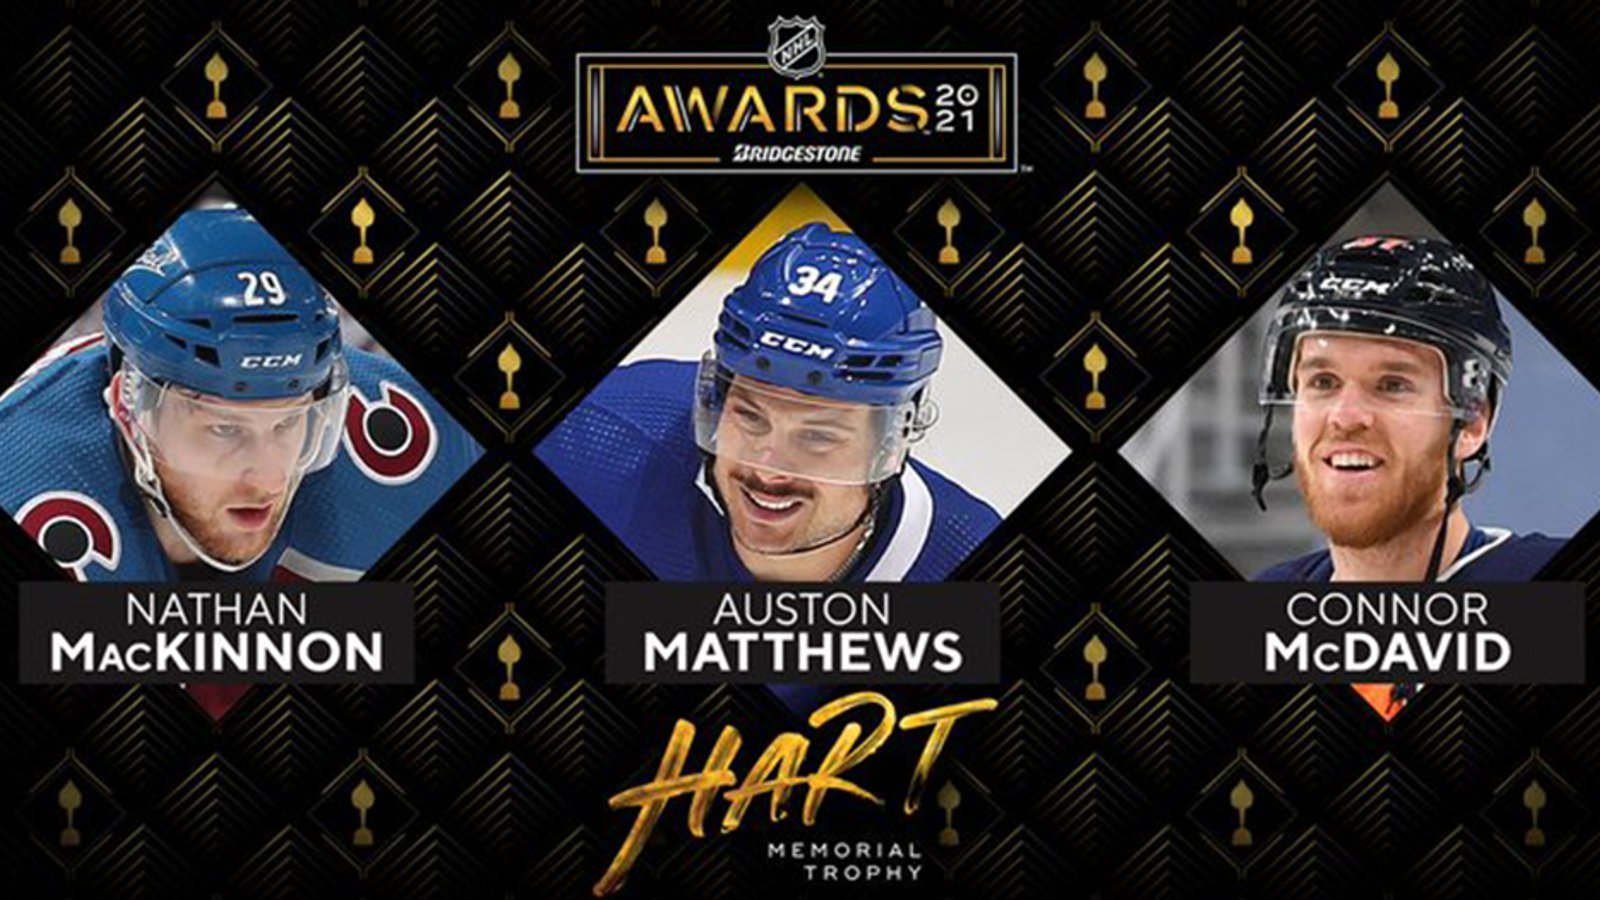 MacKinnon, Matthews and McDavid nominated for Hart Trophy as NHL MVP